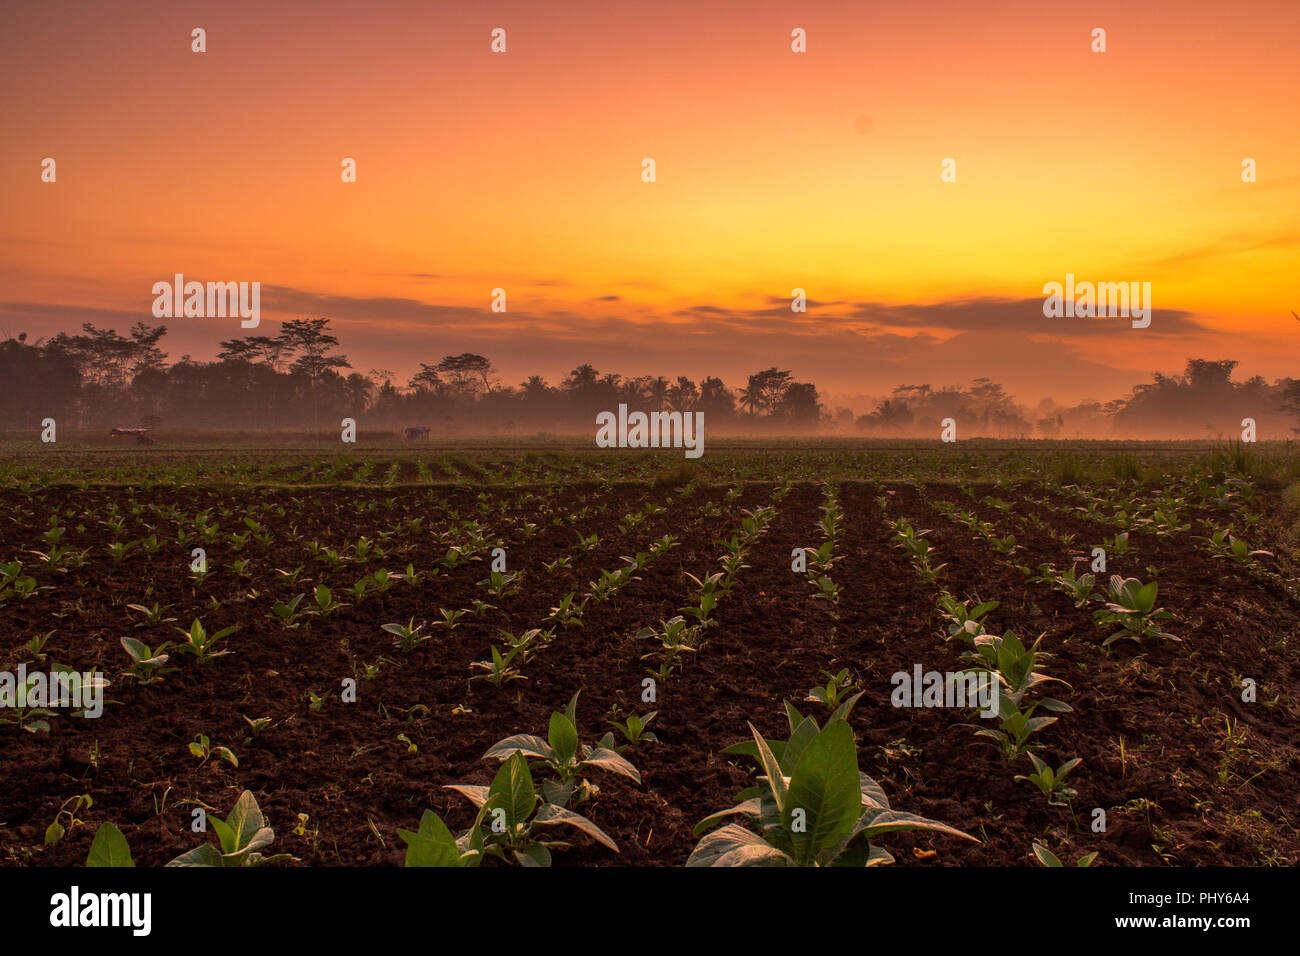 Tobacco plantation in the misty morning. Sunrise over tobacco farm with orange sky, Magelang, Indonesia Stock Photo